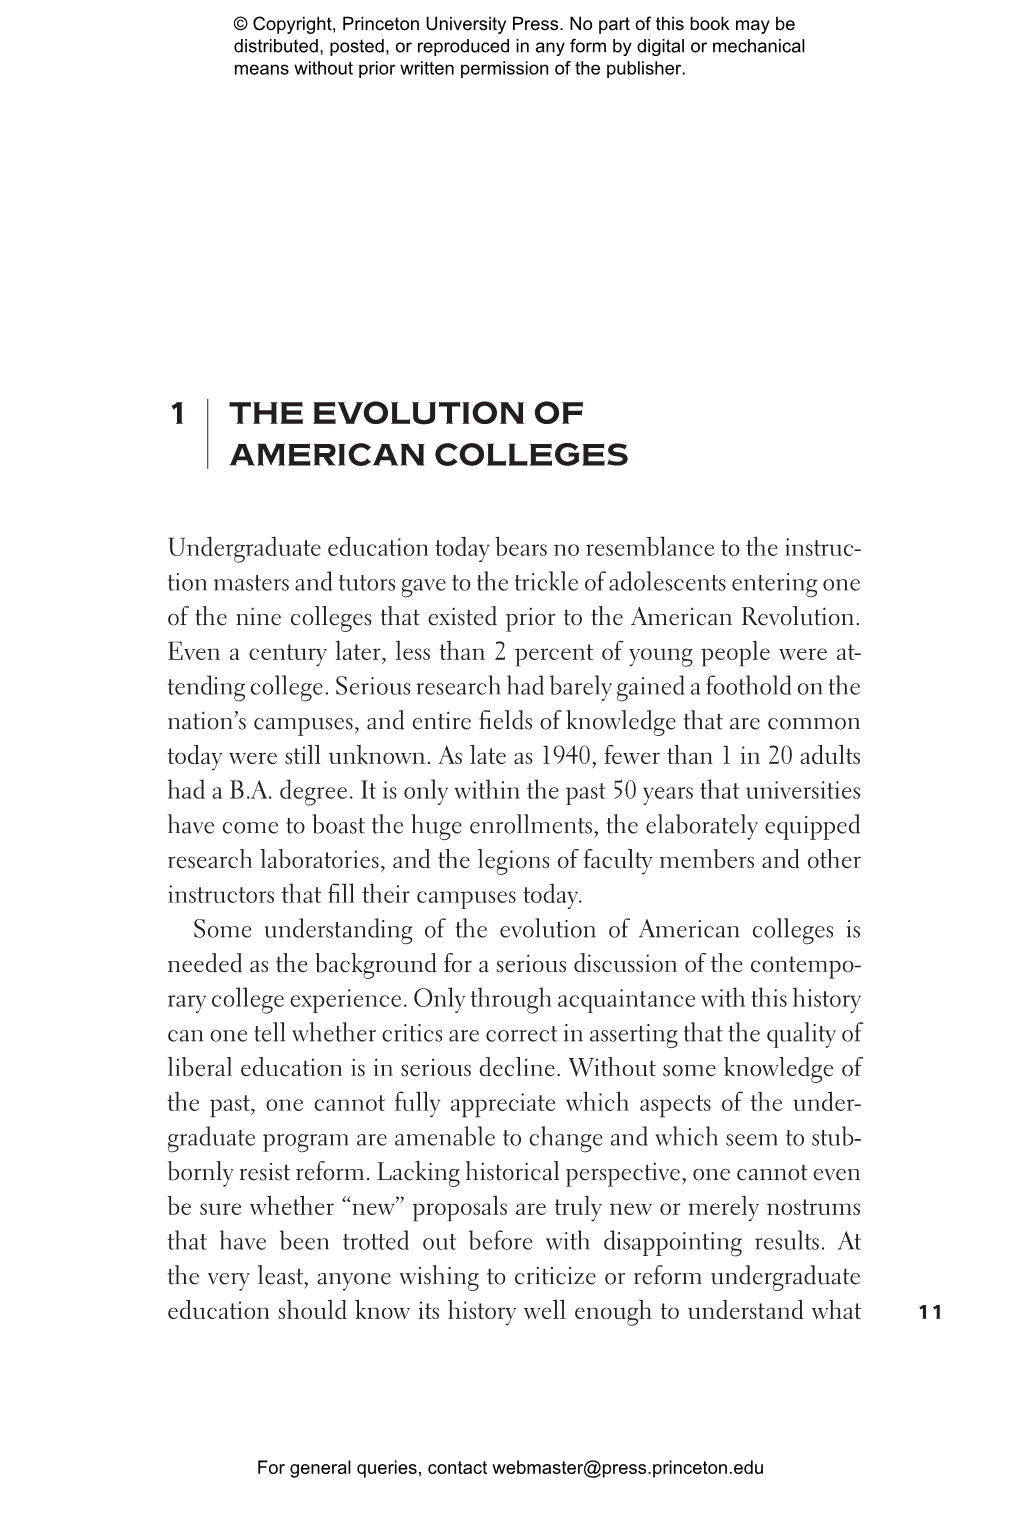 1 the Evolution of American Colleges